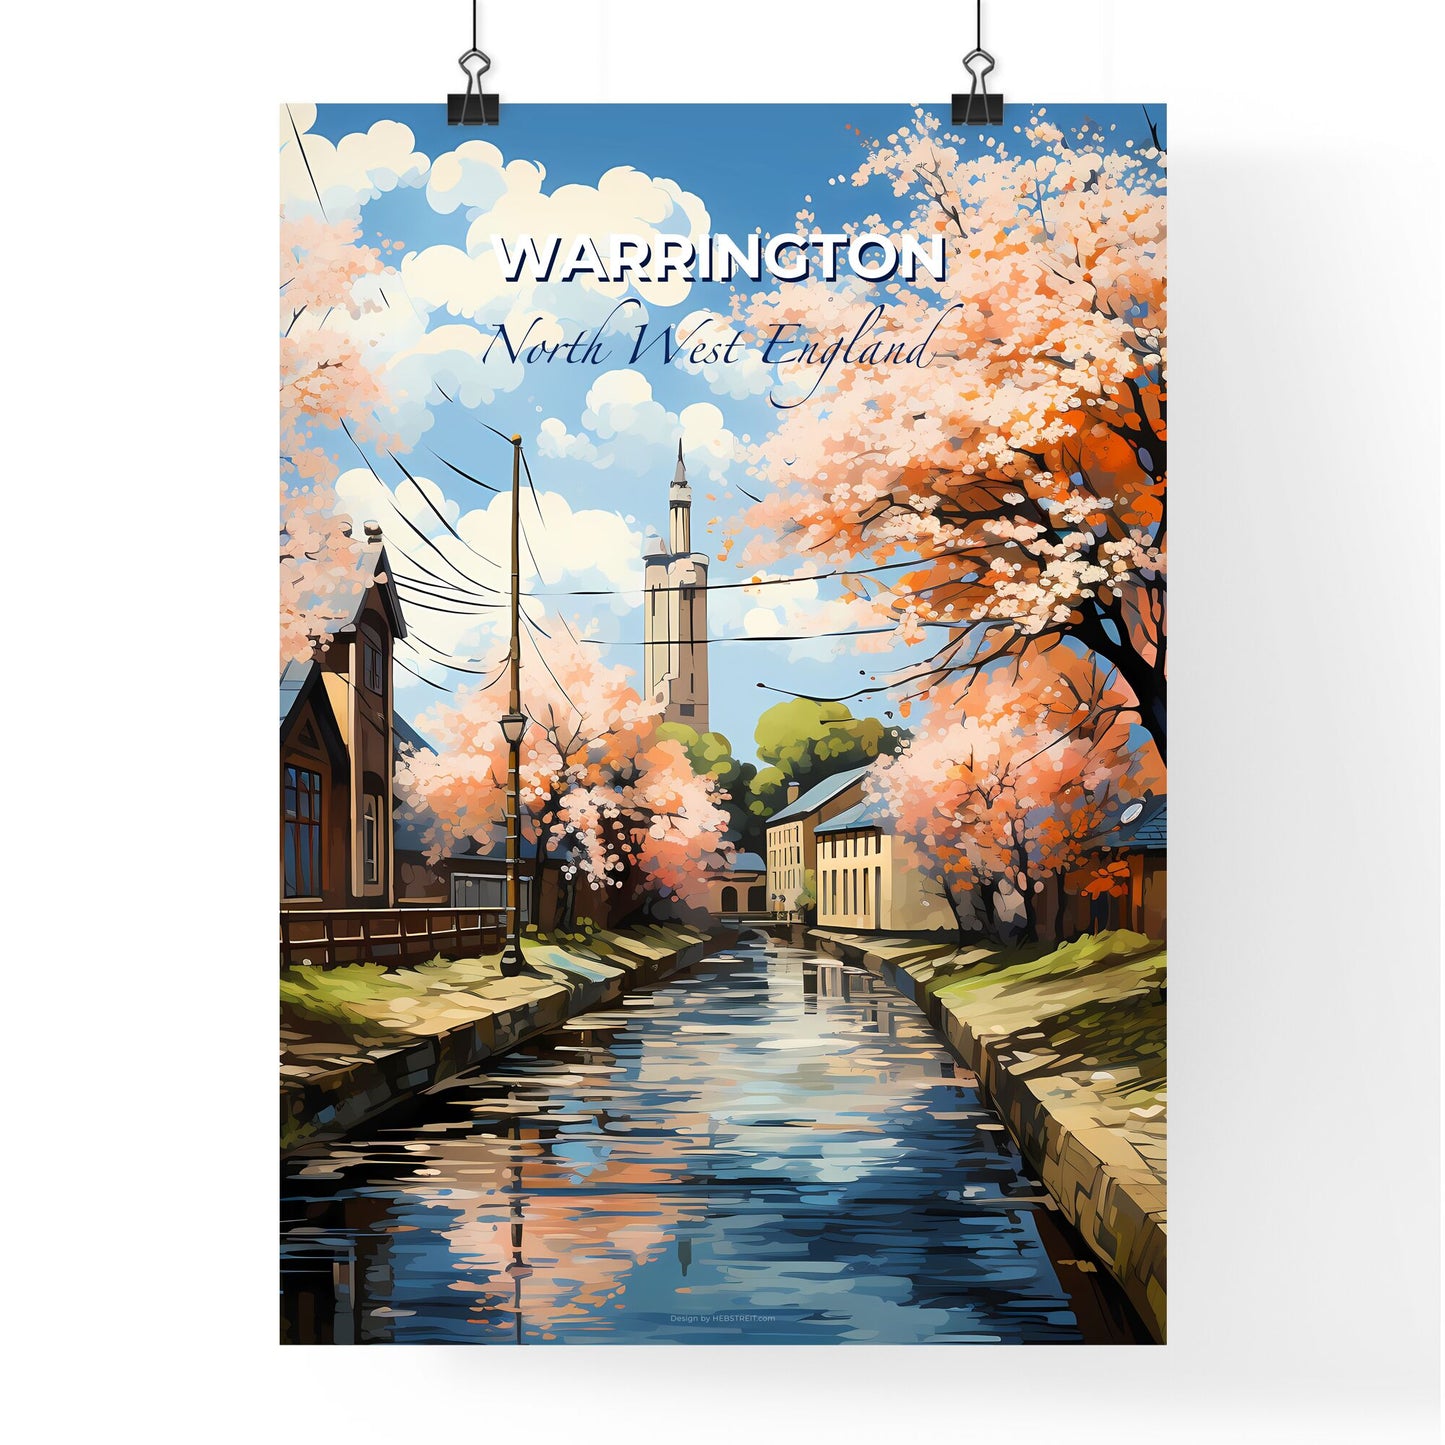 Warrington, North West England, A Poster of a water canal with trees and buildings in the background Default Title